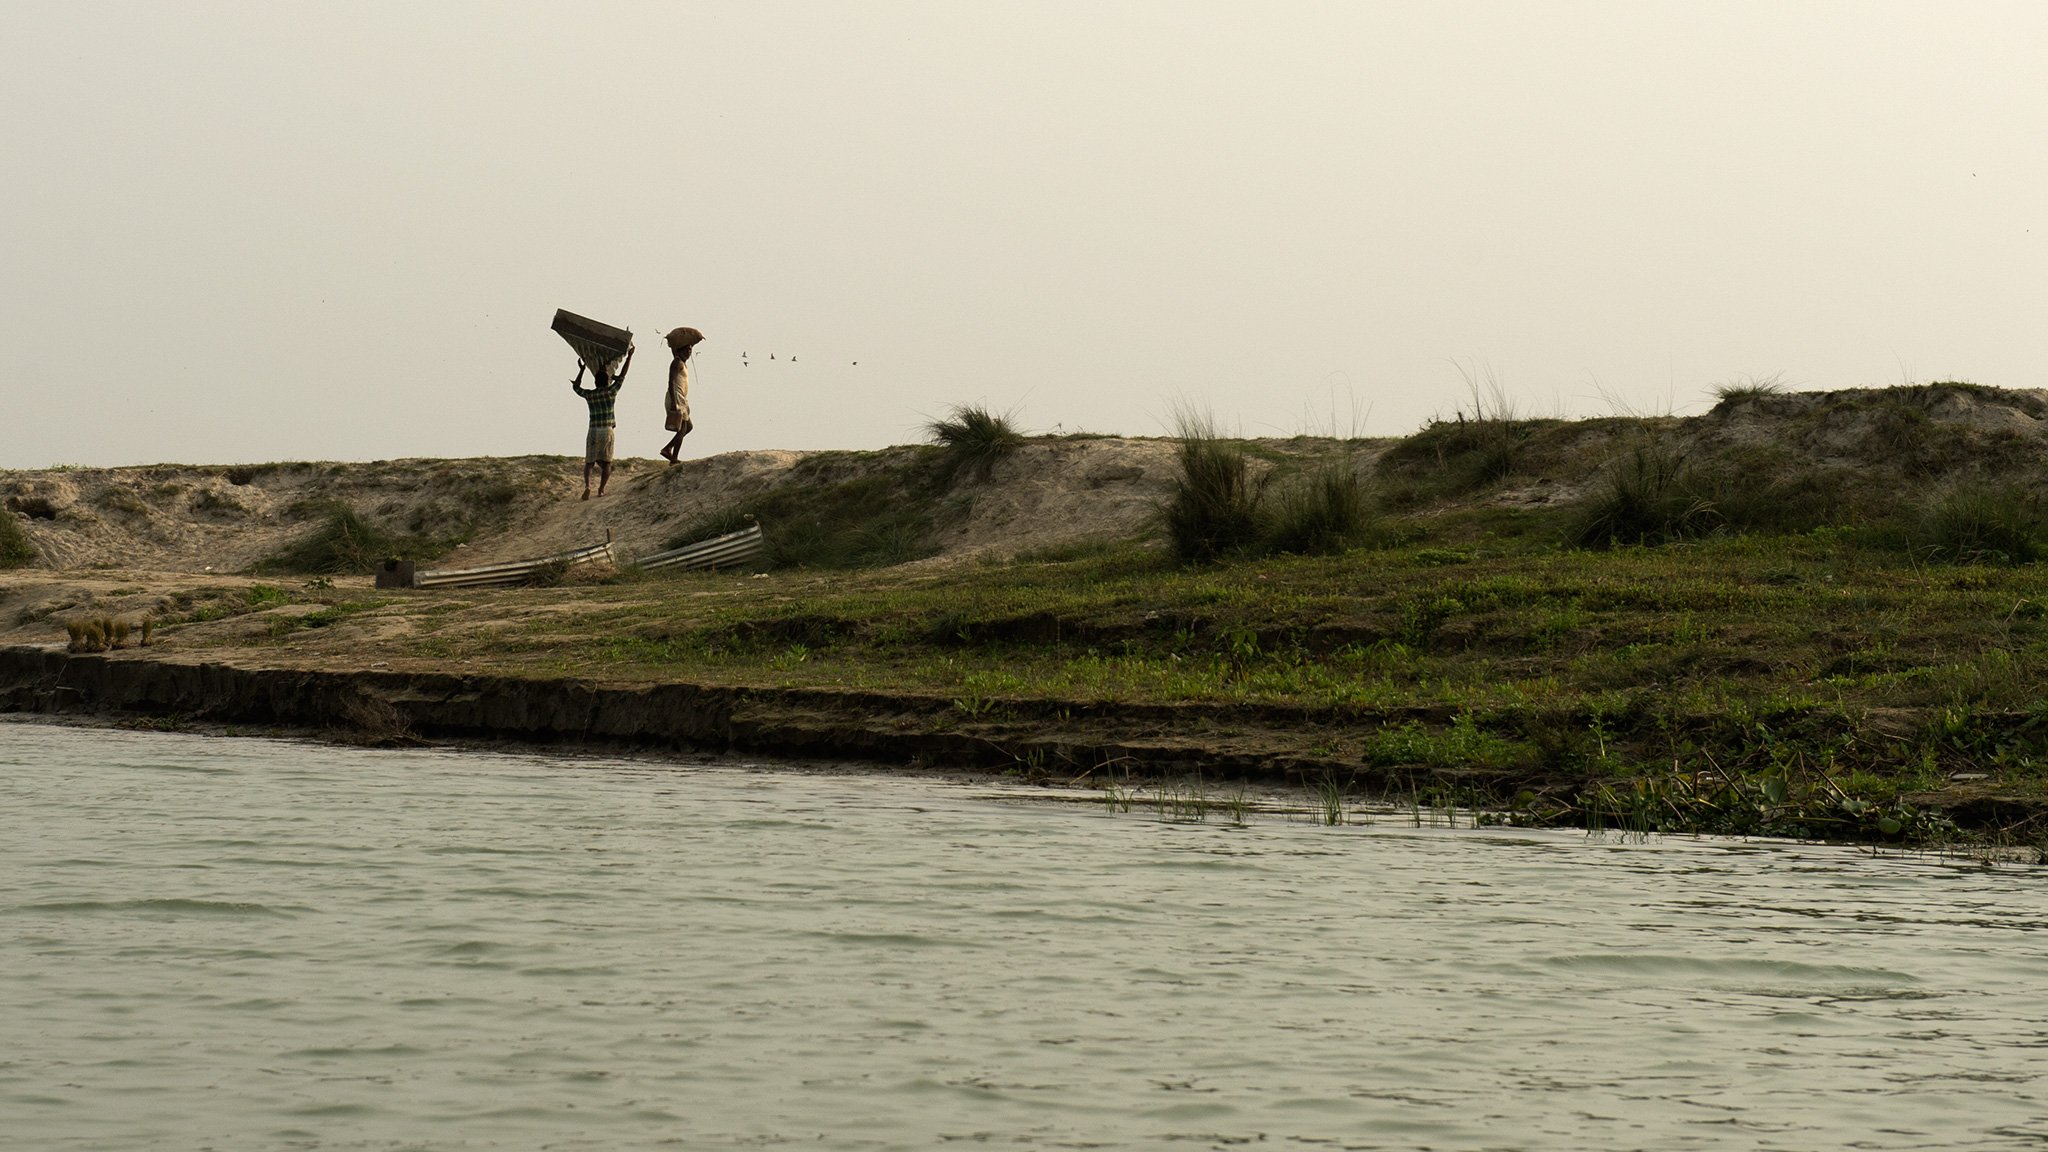 <p>Much of Bangladesh’s salinity problem seems to be linked to the Farraka barrage, which went into operation in 1975 (Photo by Arati Kumar-Rao)</p>